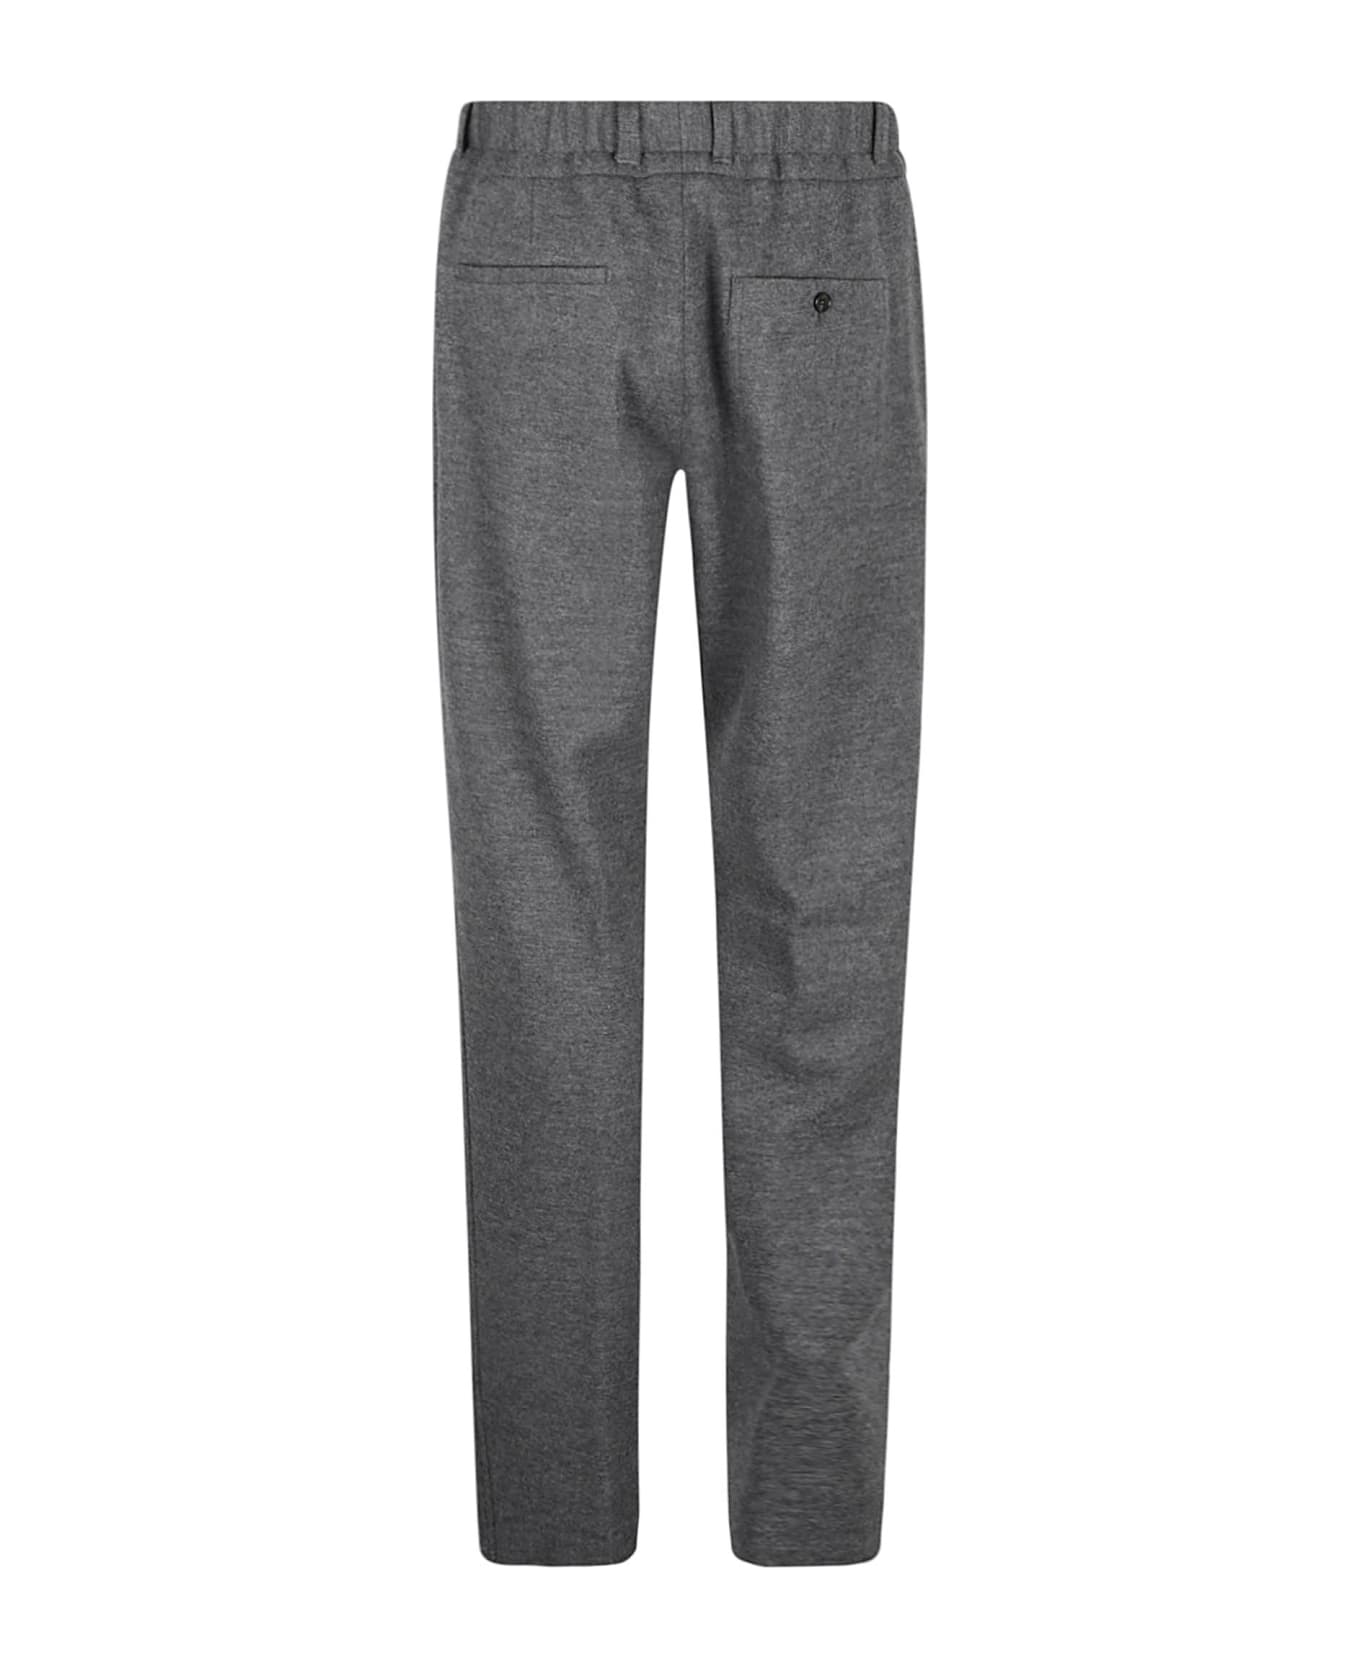 Lanvin Buttoned Waist Trousers - Dark Grey ボトムス